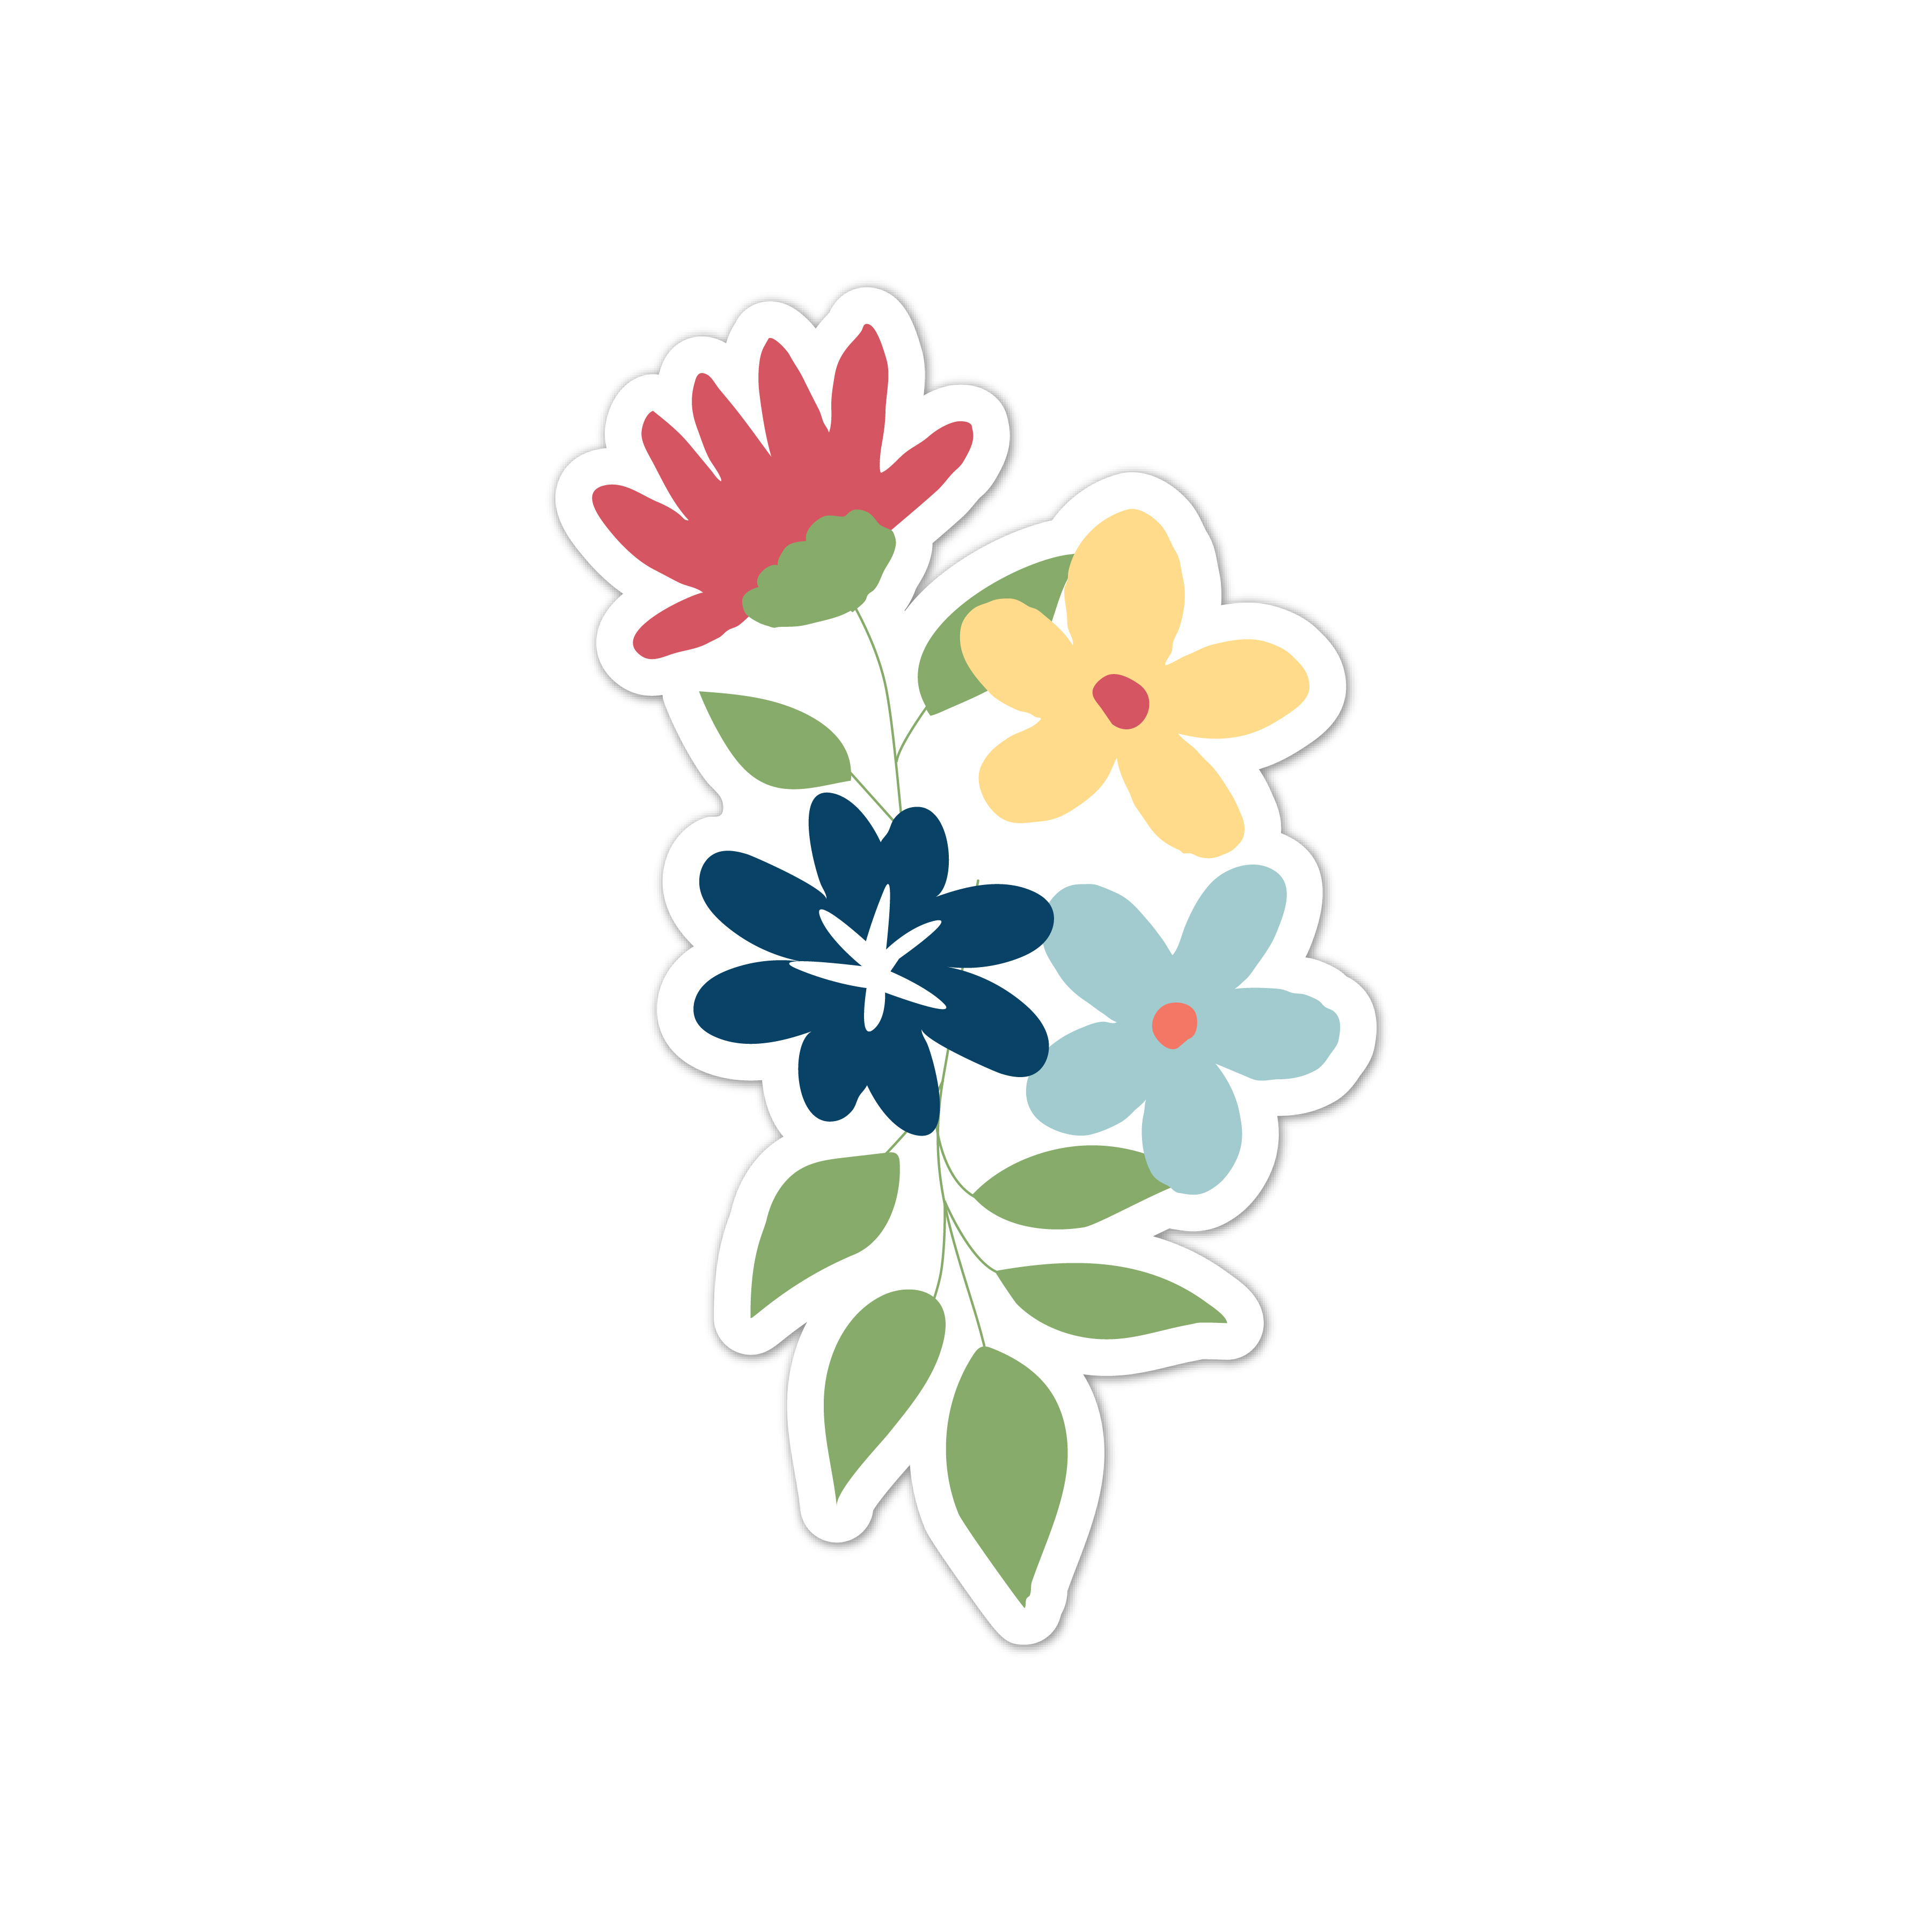 Fancy Flowers Stickers to Download/Print & Cut!